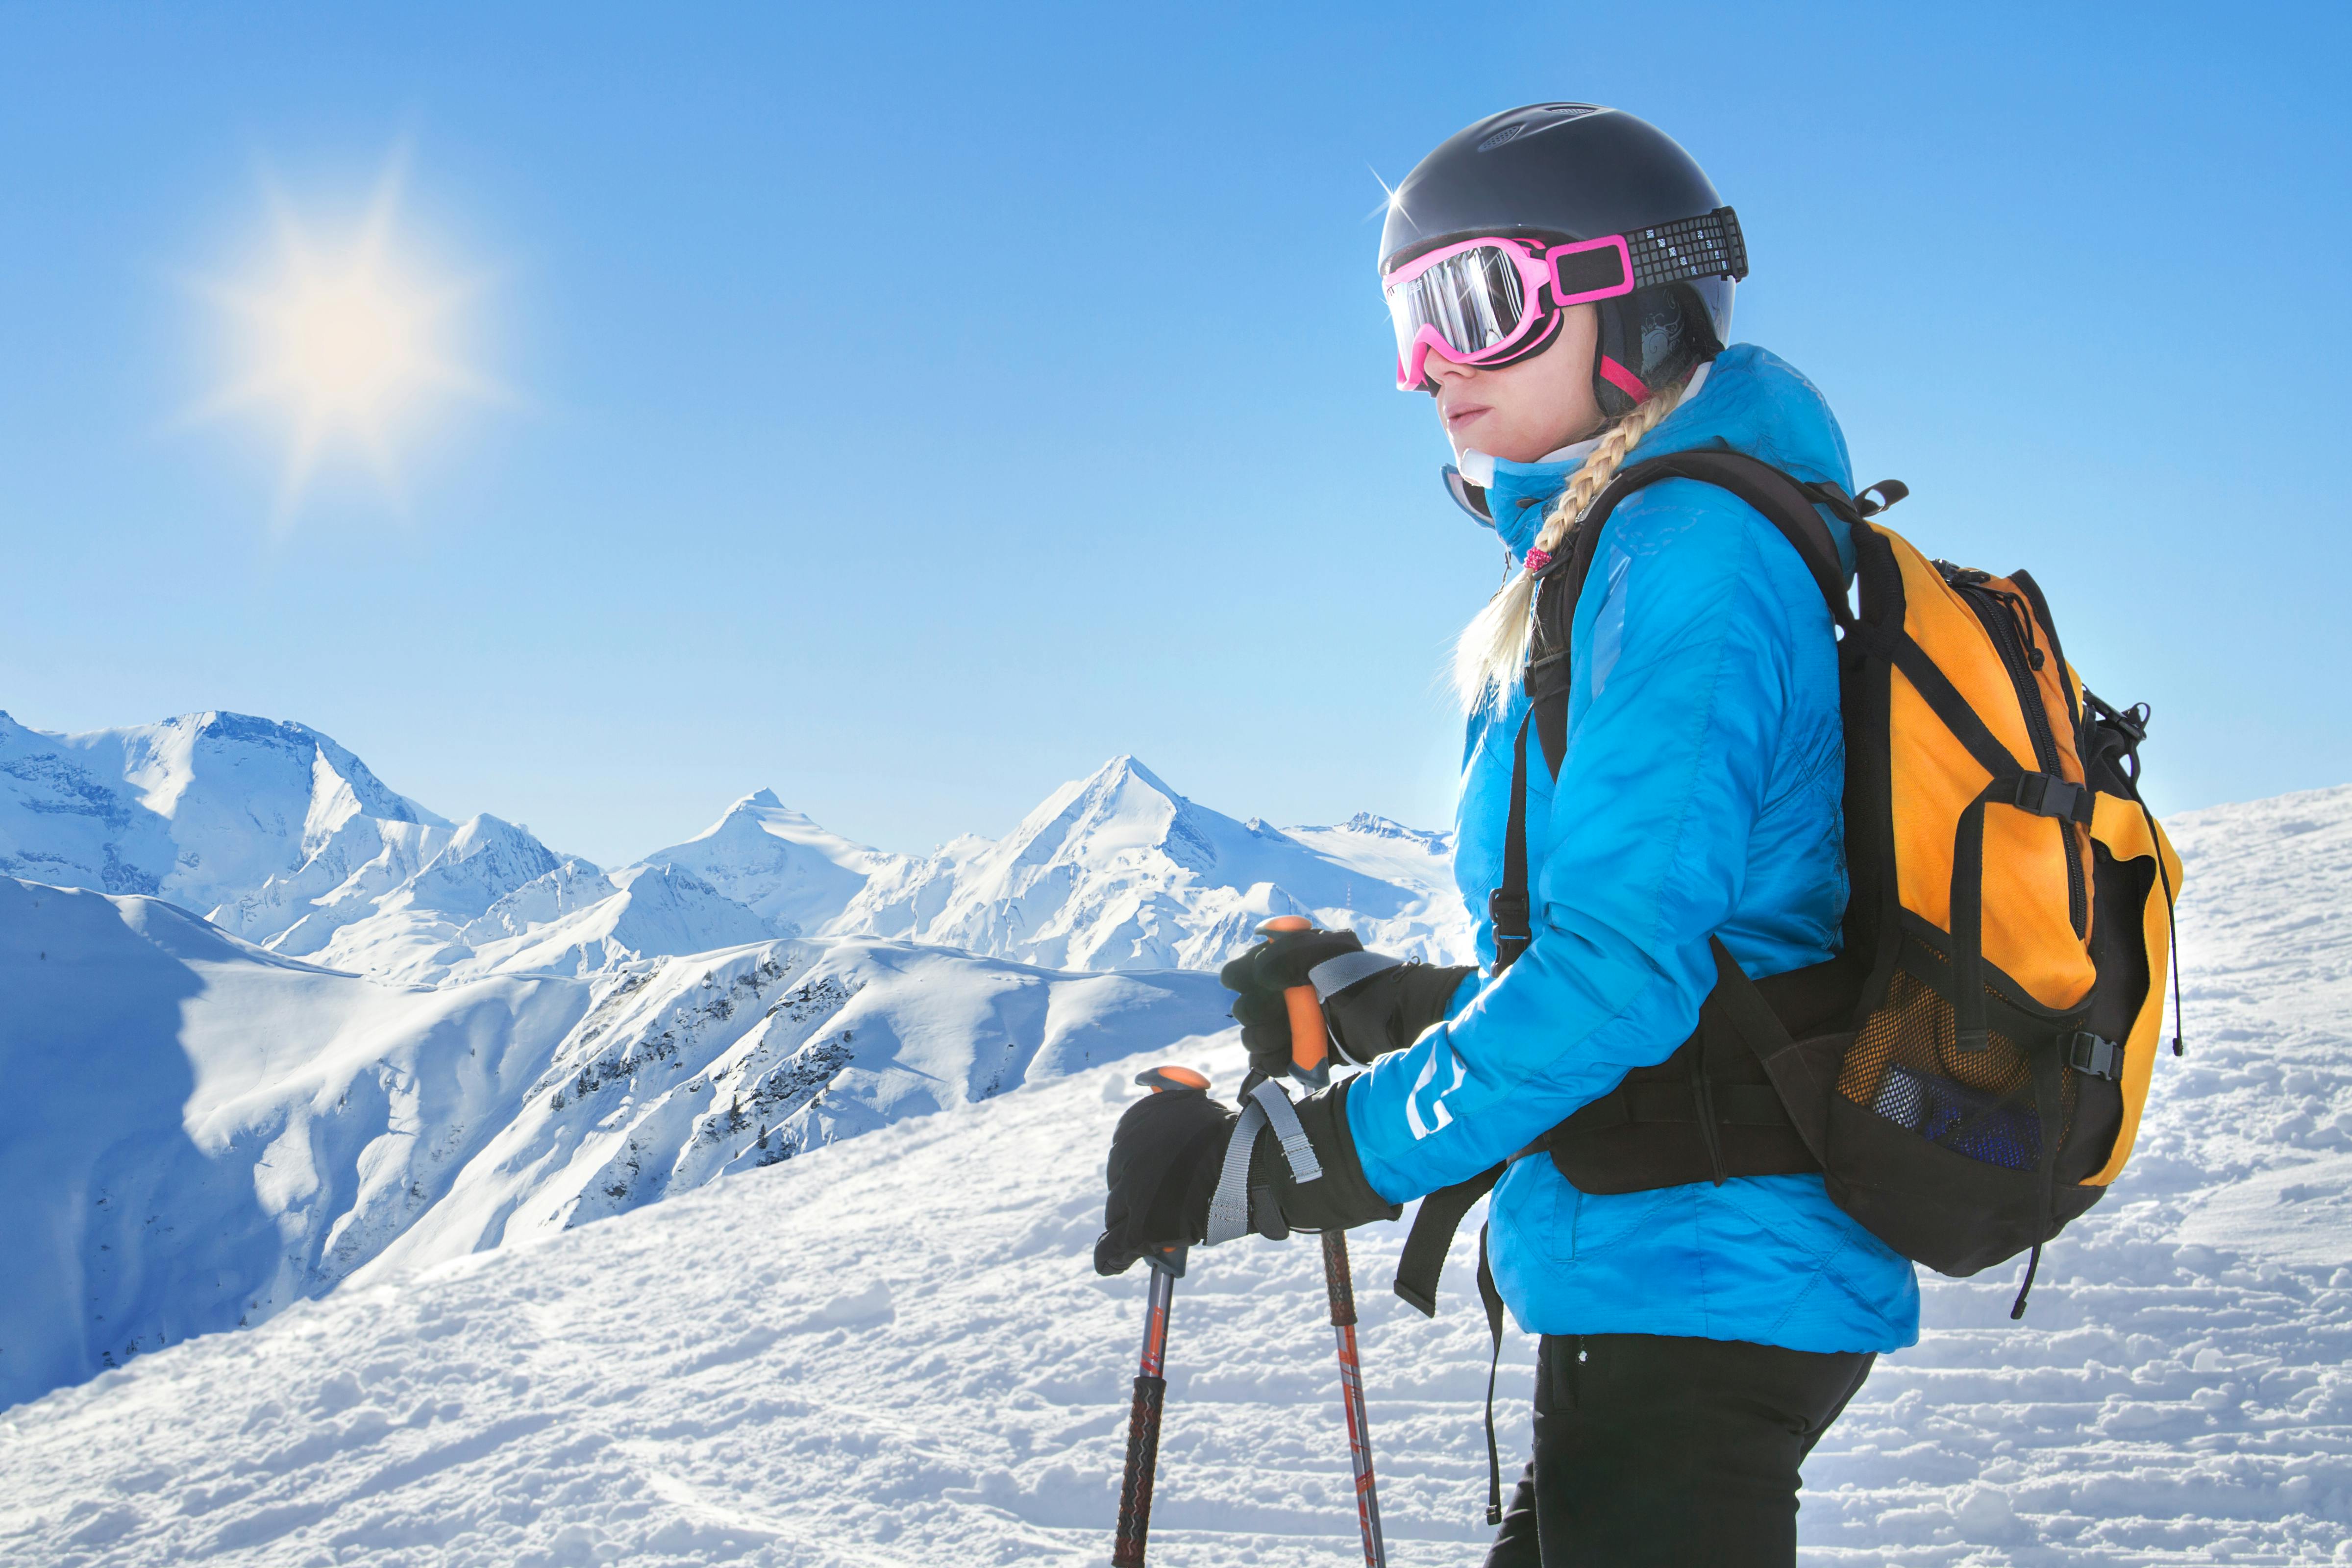 The 6 Best Women's Ski and Snowboard Jackets